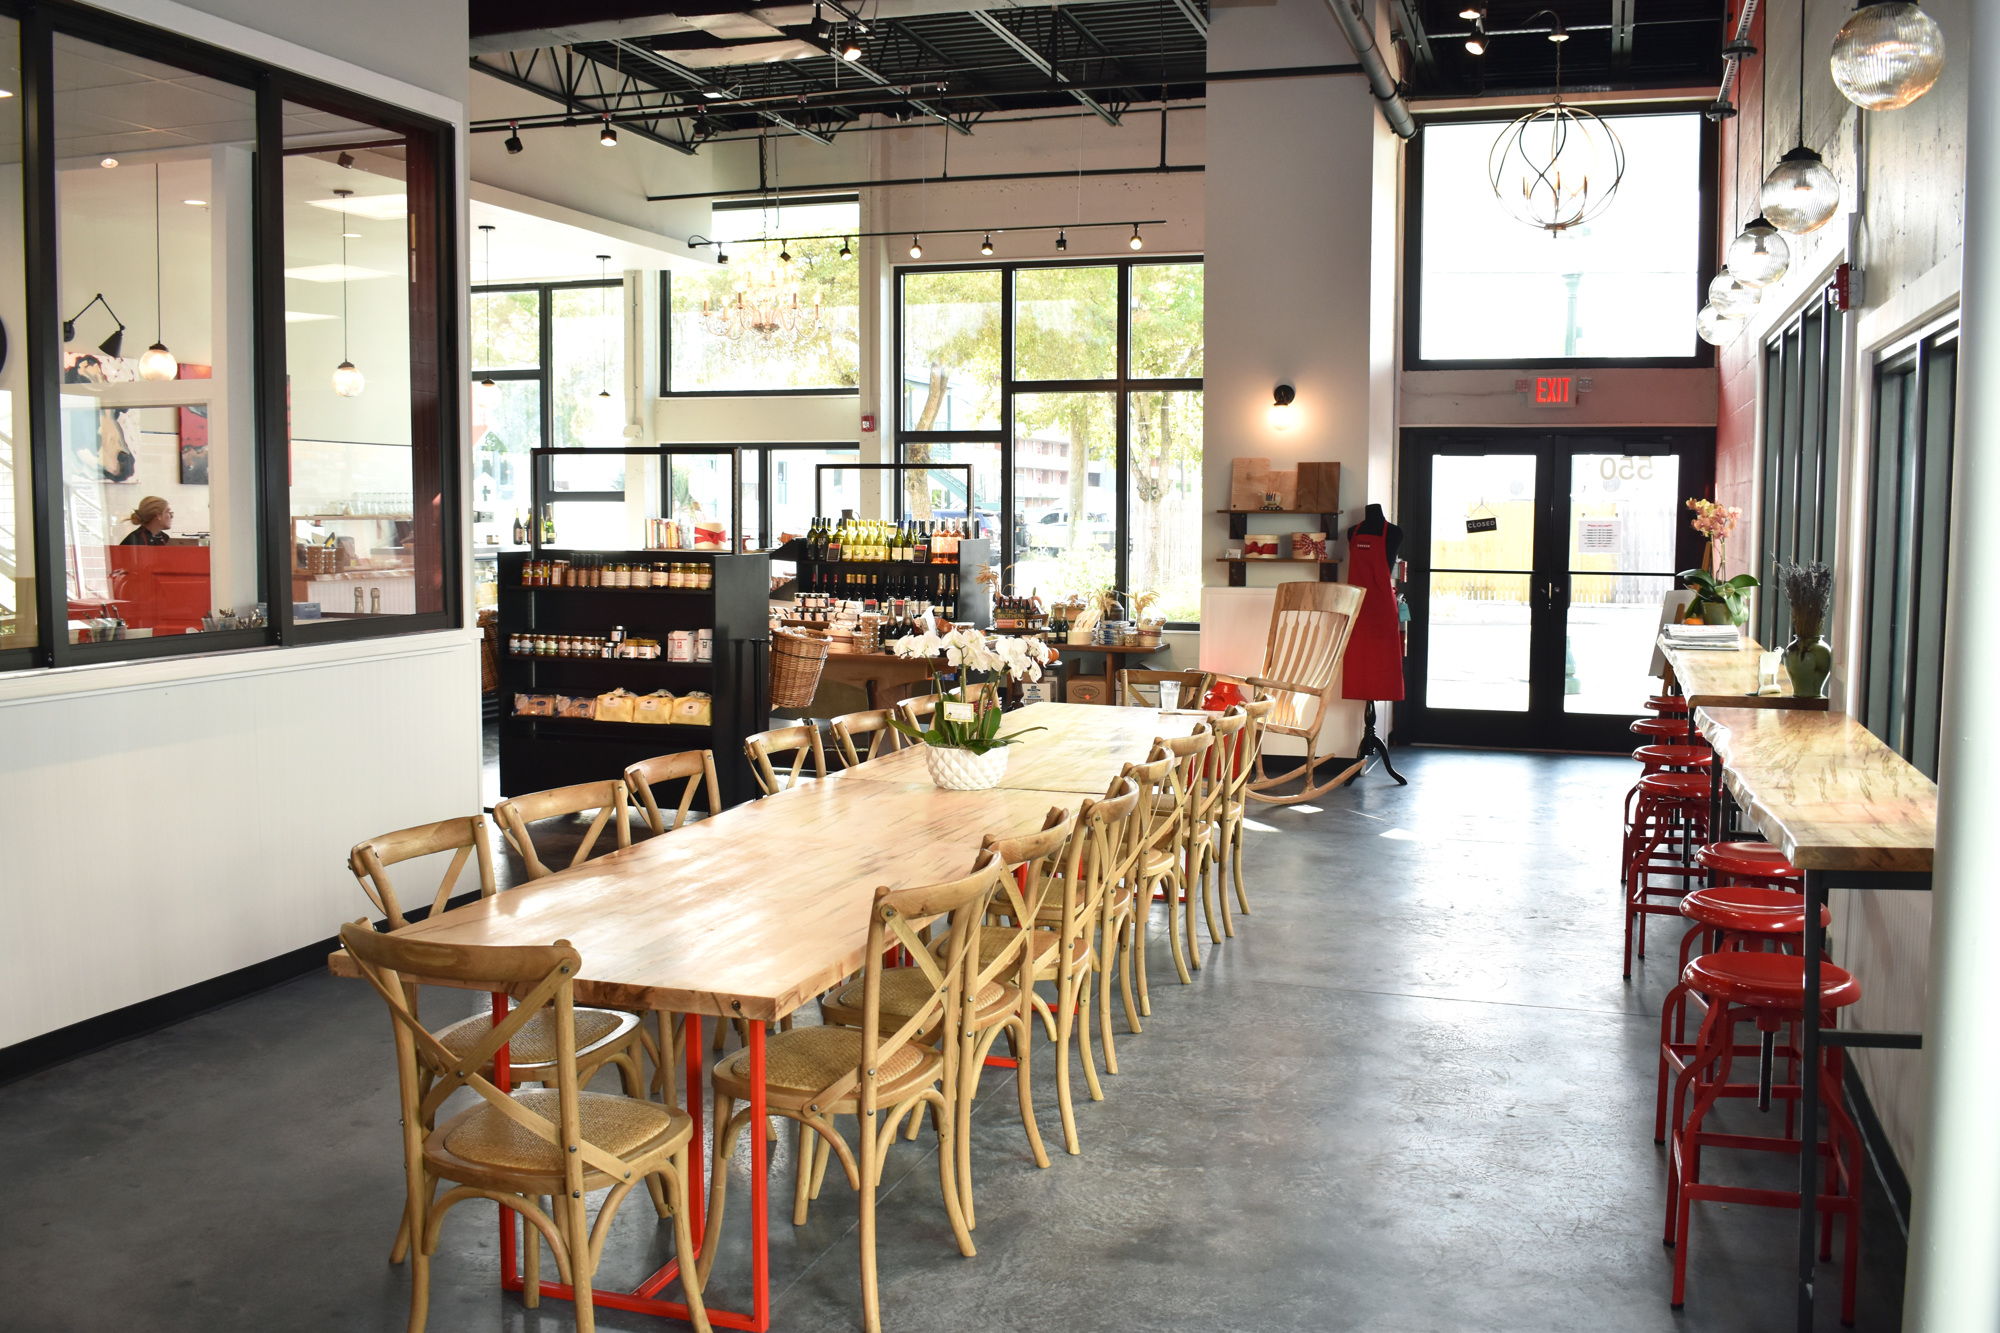 The new Artisan Cheese Co. features a long community-style table in the middle of the shop. Photo by Niki Kottmann